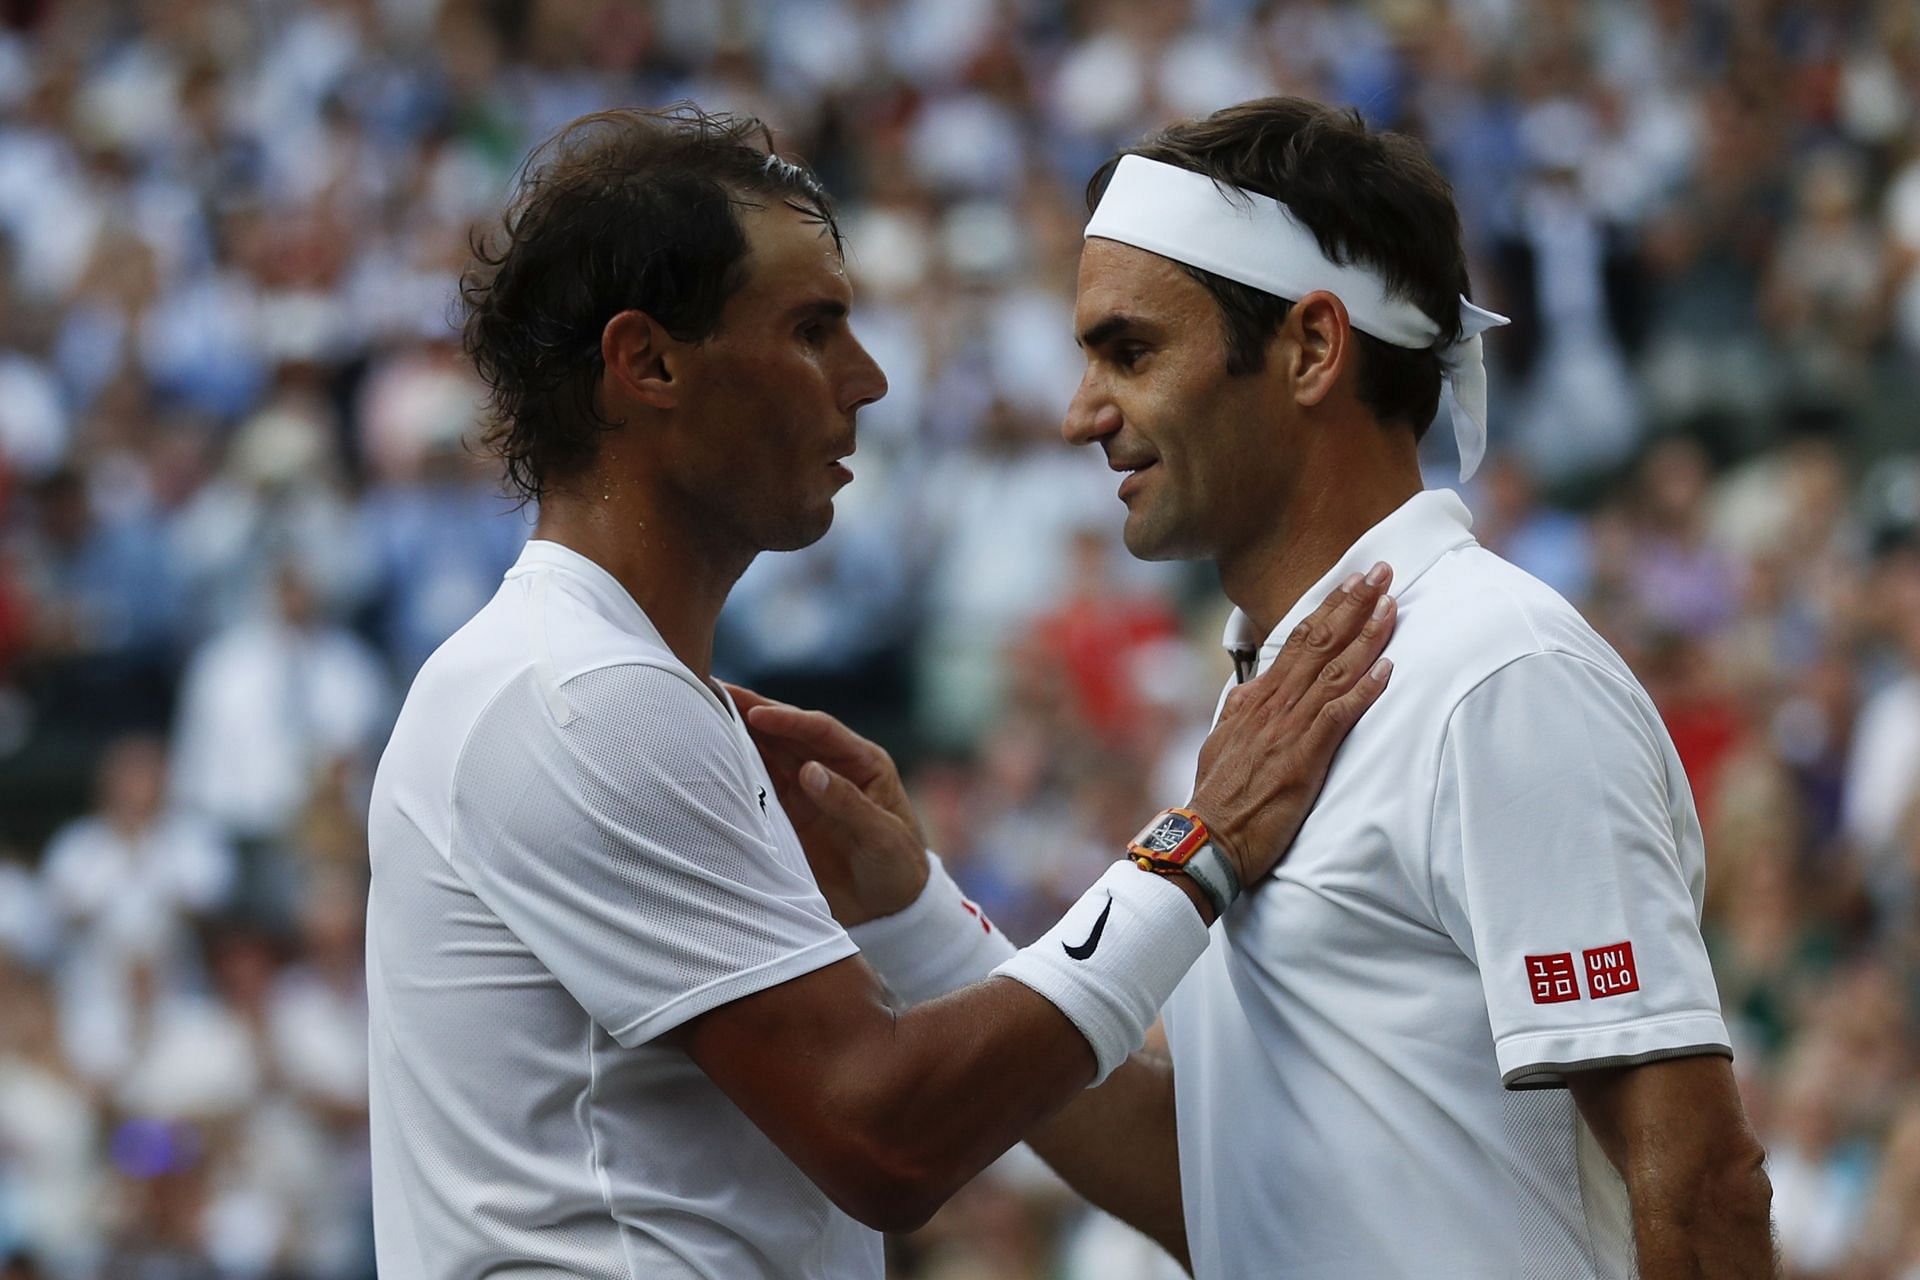 Rafael Nadal and Roger Federer at the end of their semifinal match in the 2019 Wimbledon